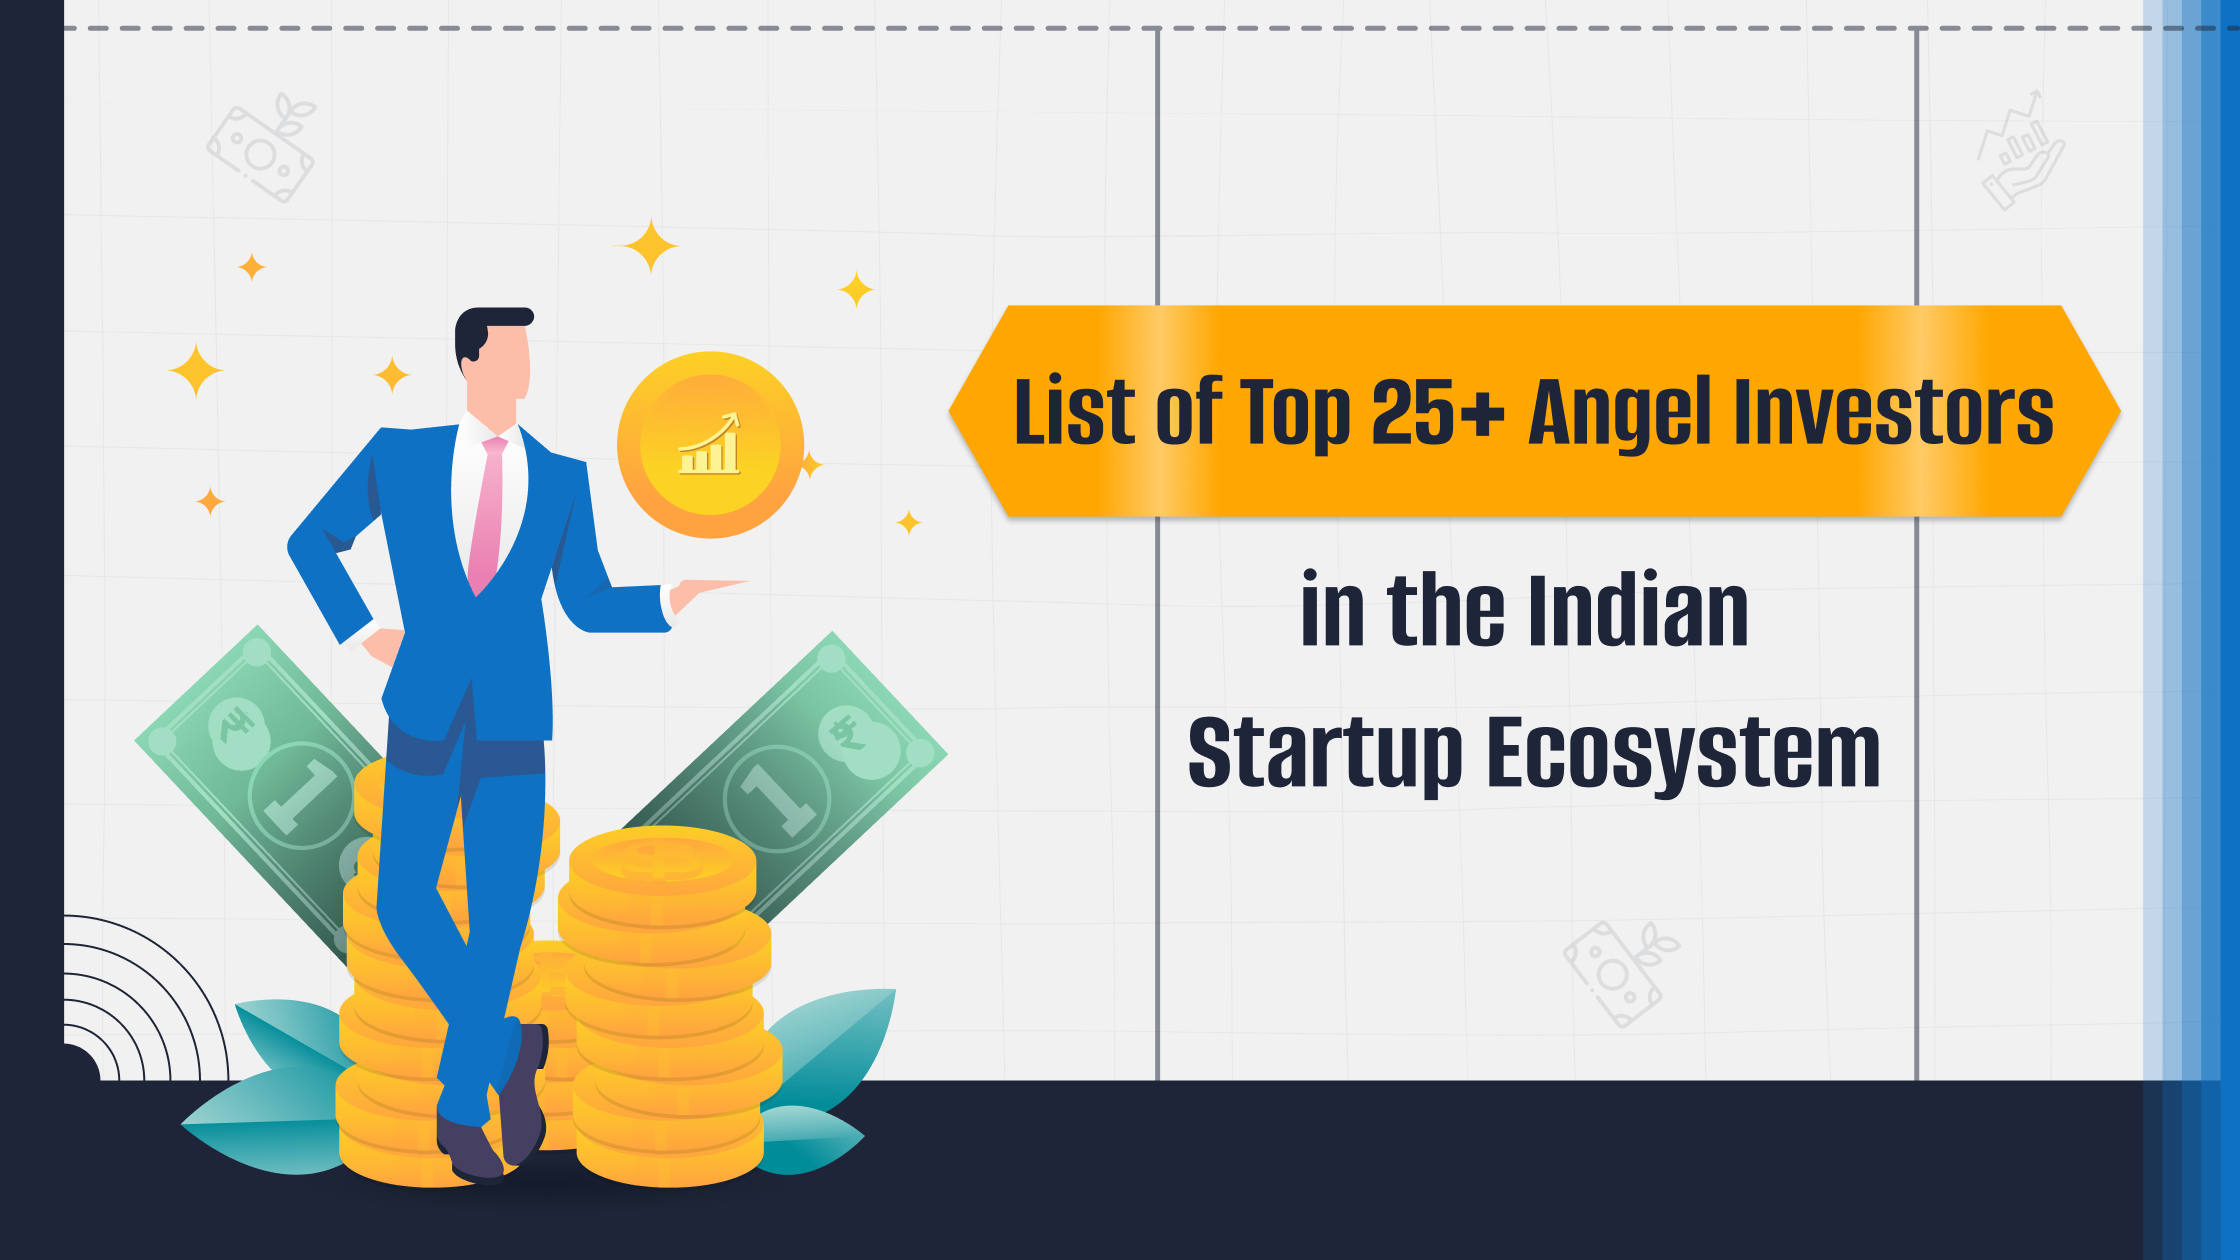 List of Top 25 Angel Investors in the Indian Startup Ecosystem